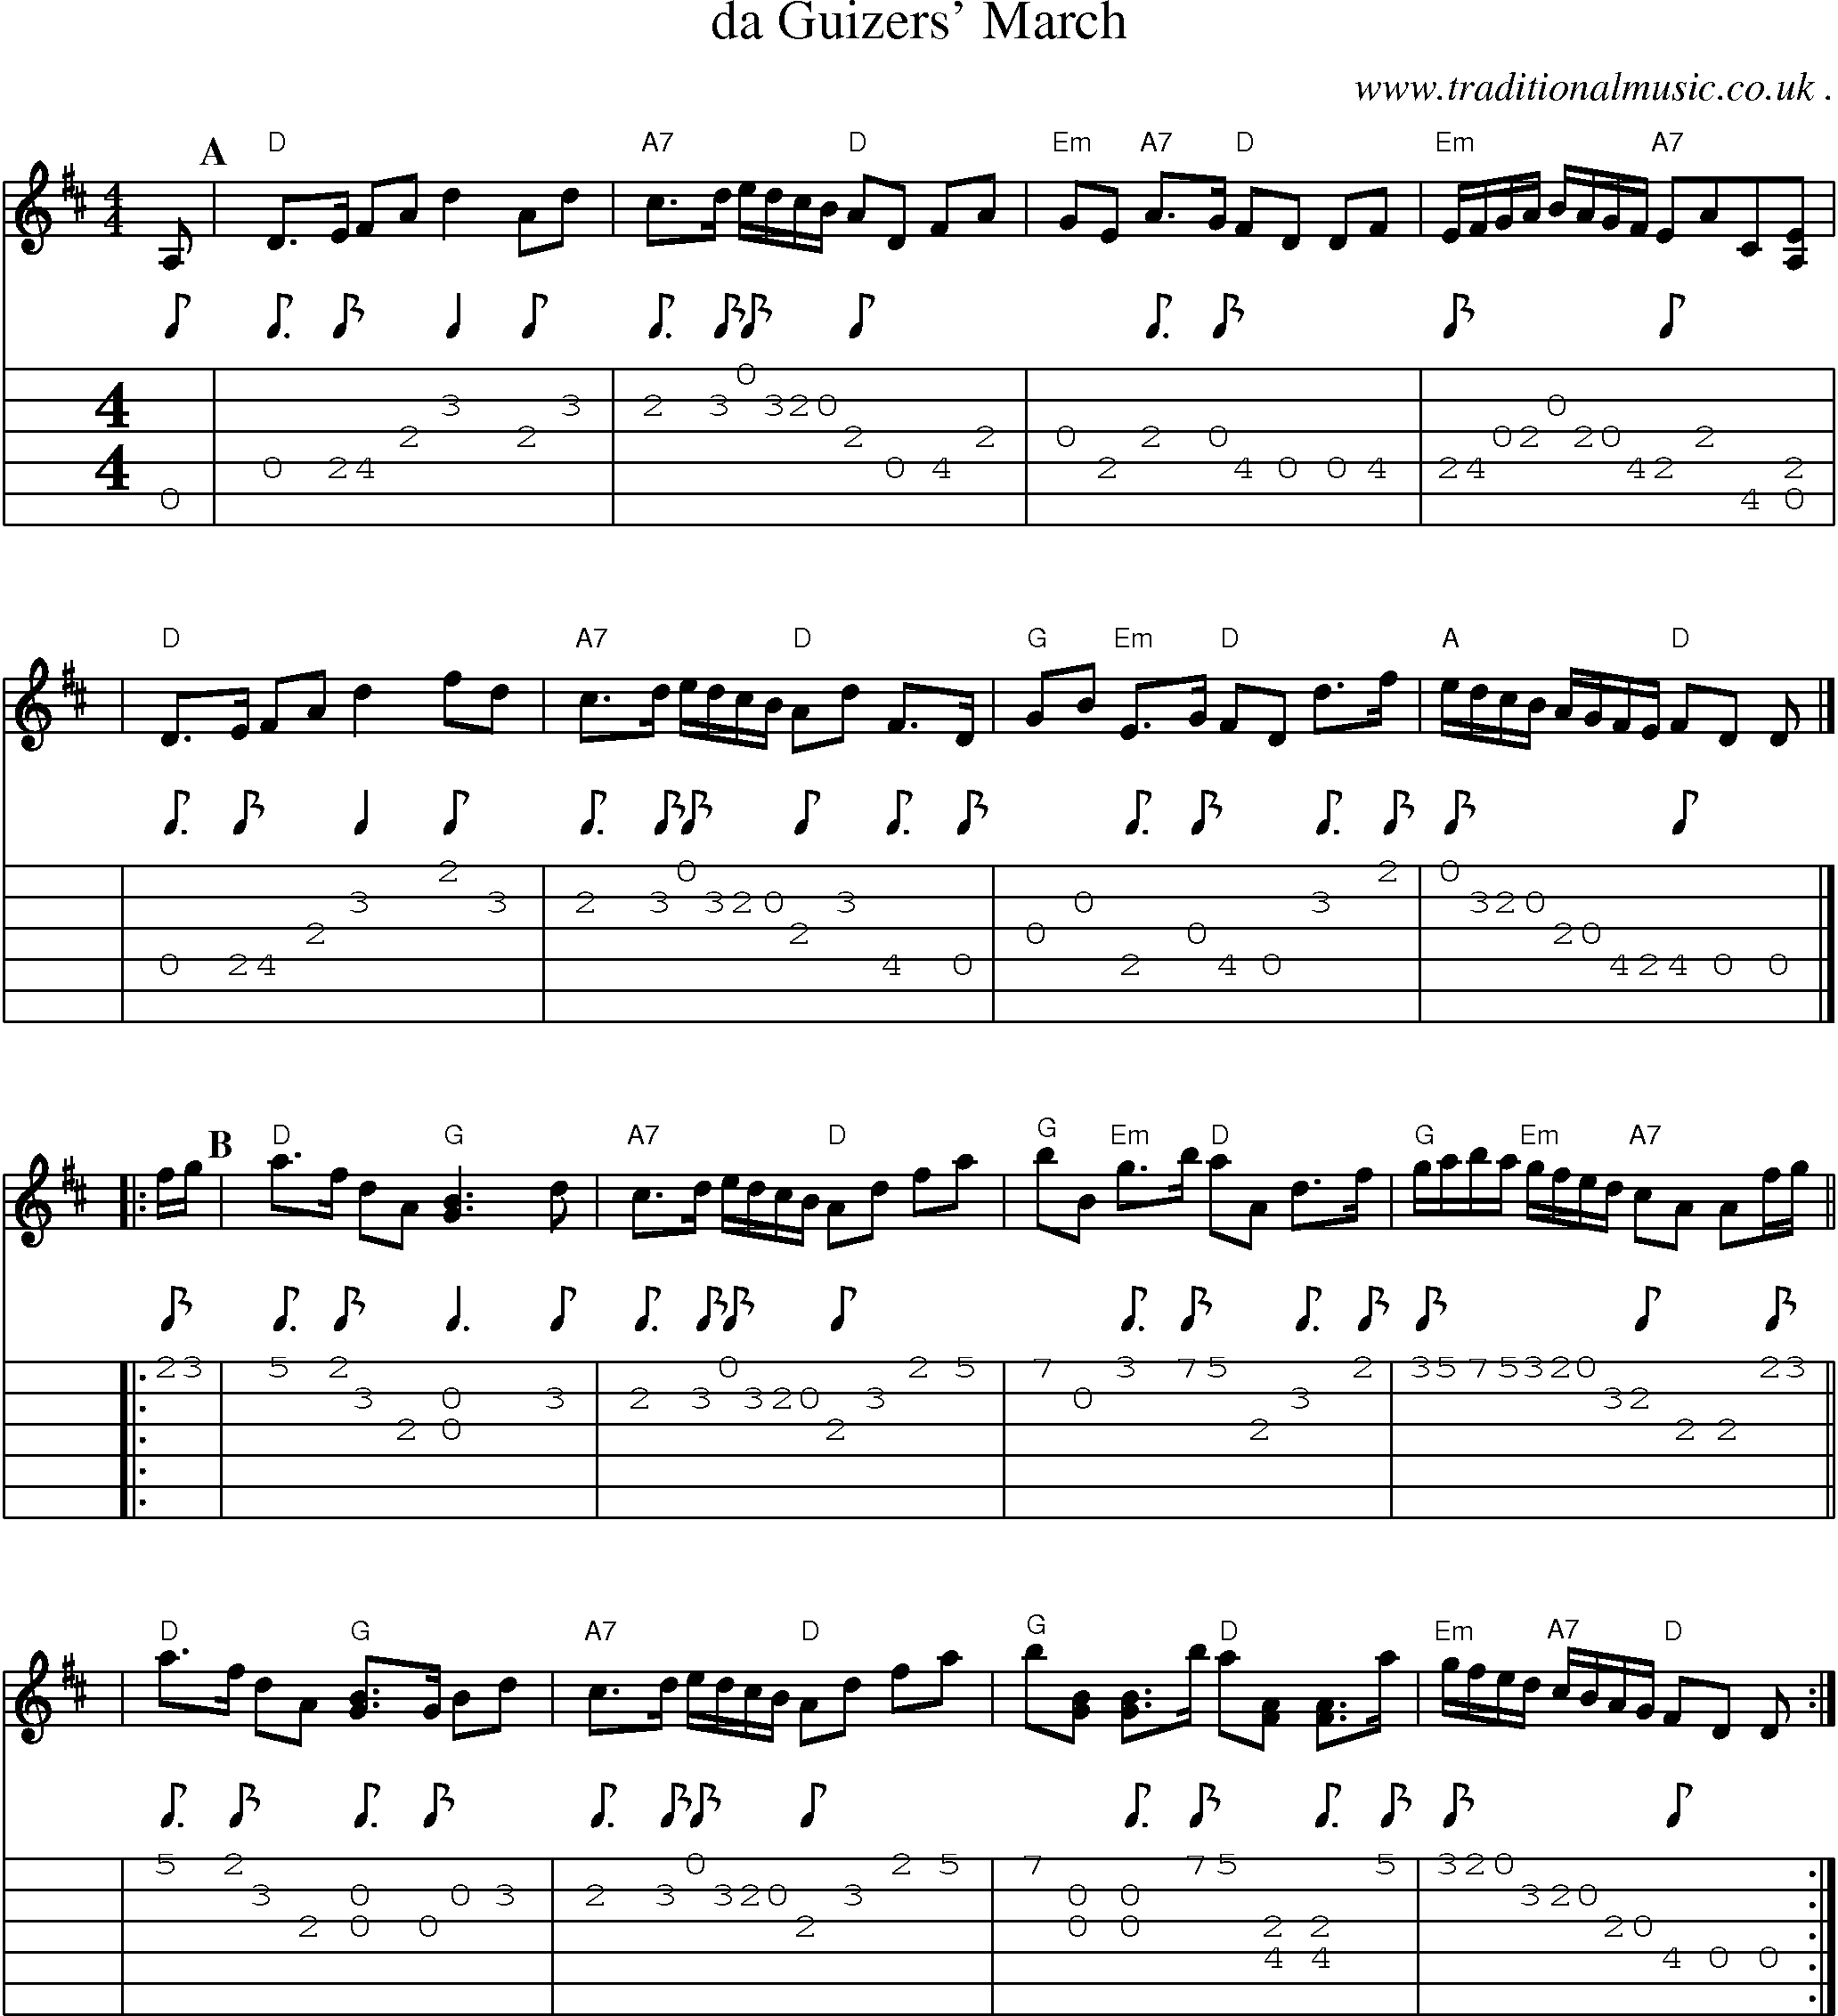 Sheet-music  score, Chords and Guitar Tabs for Da Guizers March